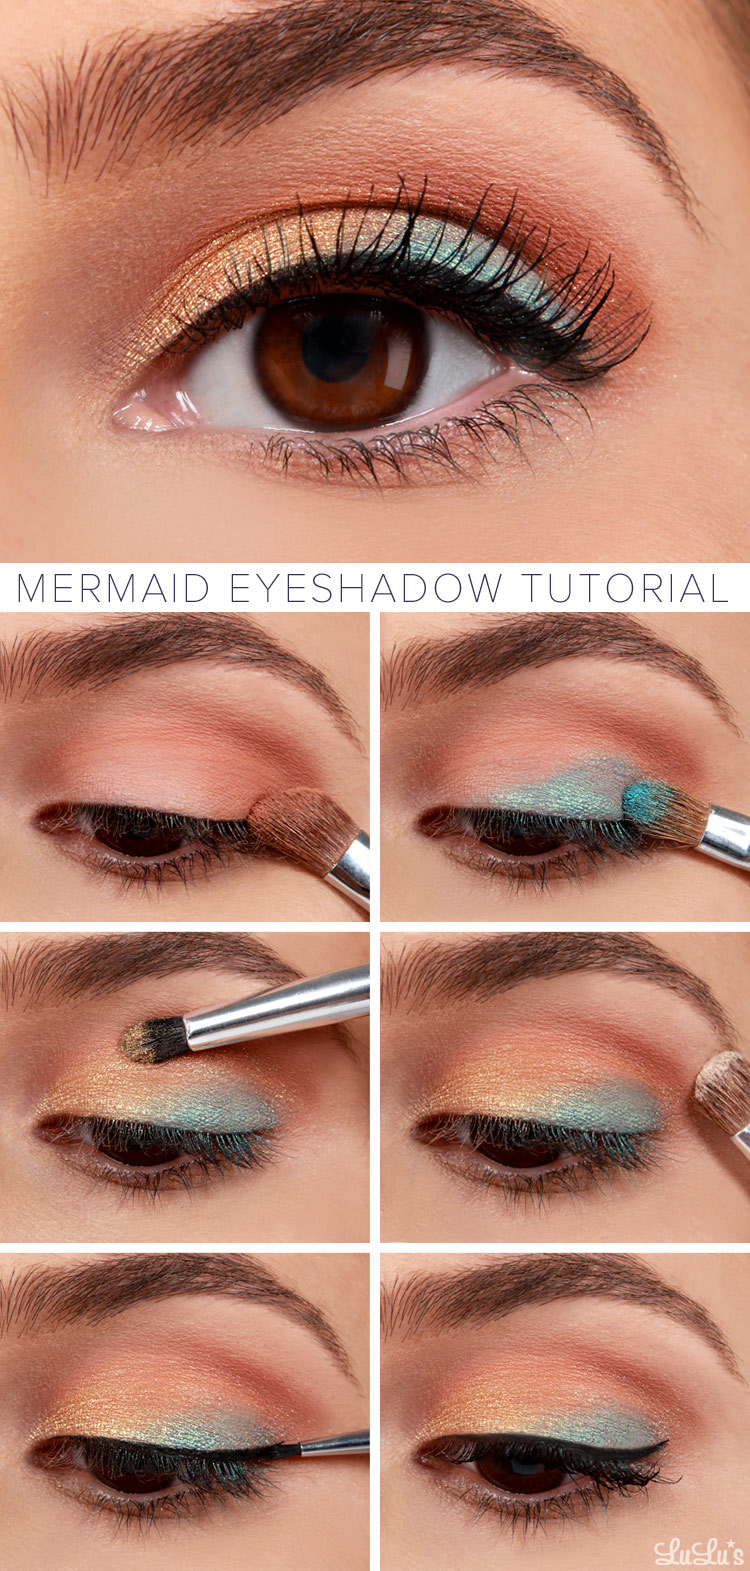 Summer Makeup Tutorials You Must See And Copy